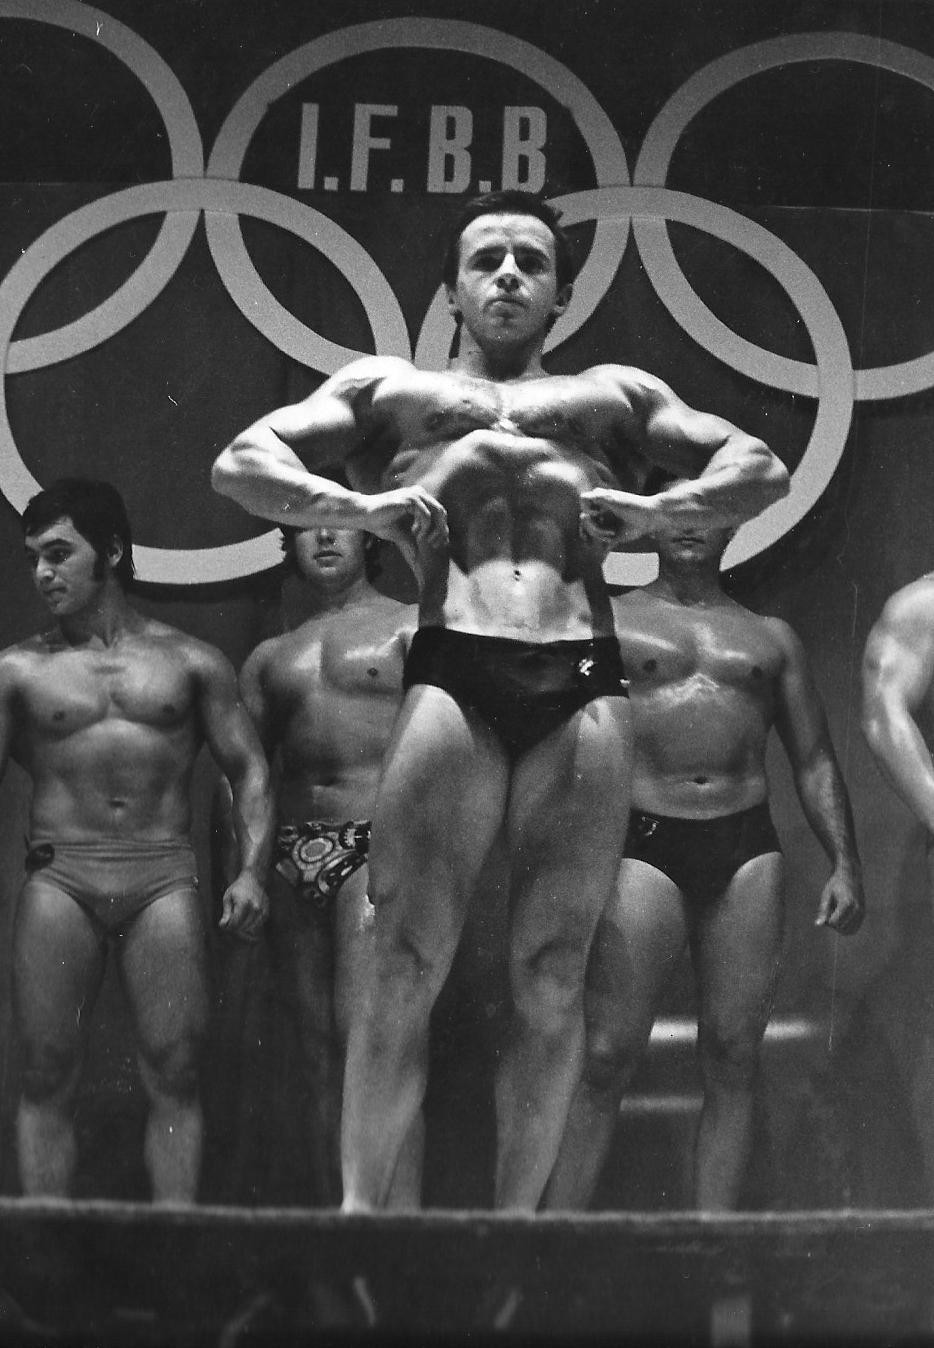 IFBB President Santonja pictured in the1970s during his time as an actively competing bodybuilder ©IFBB